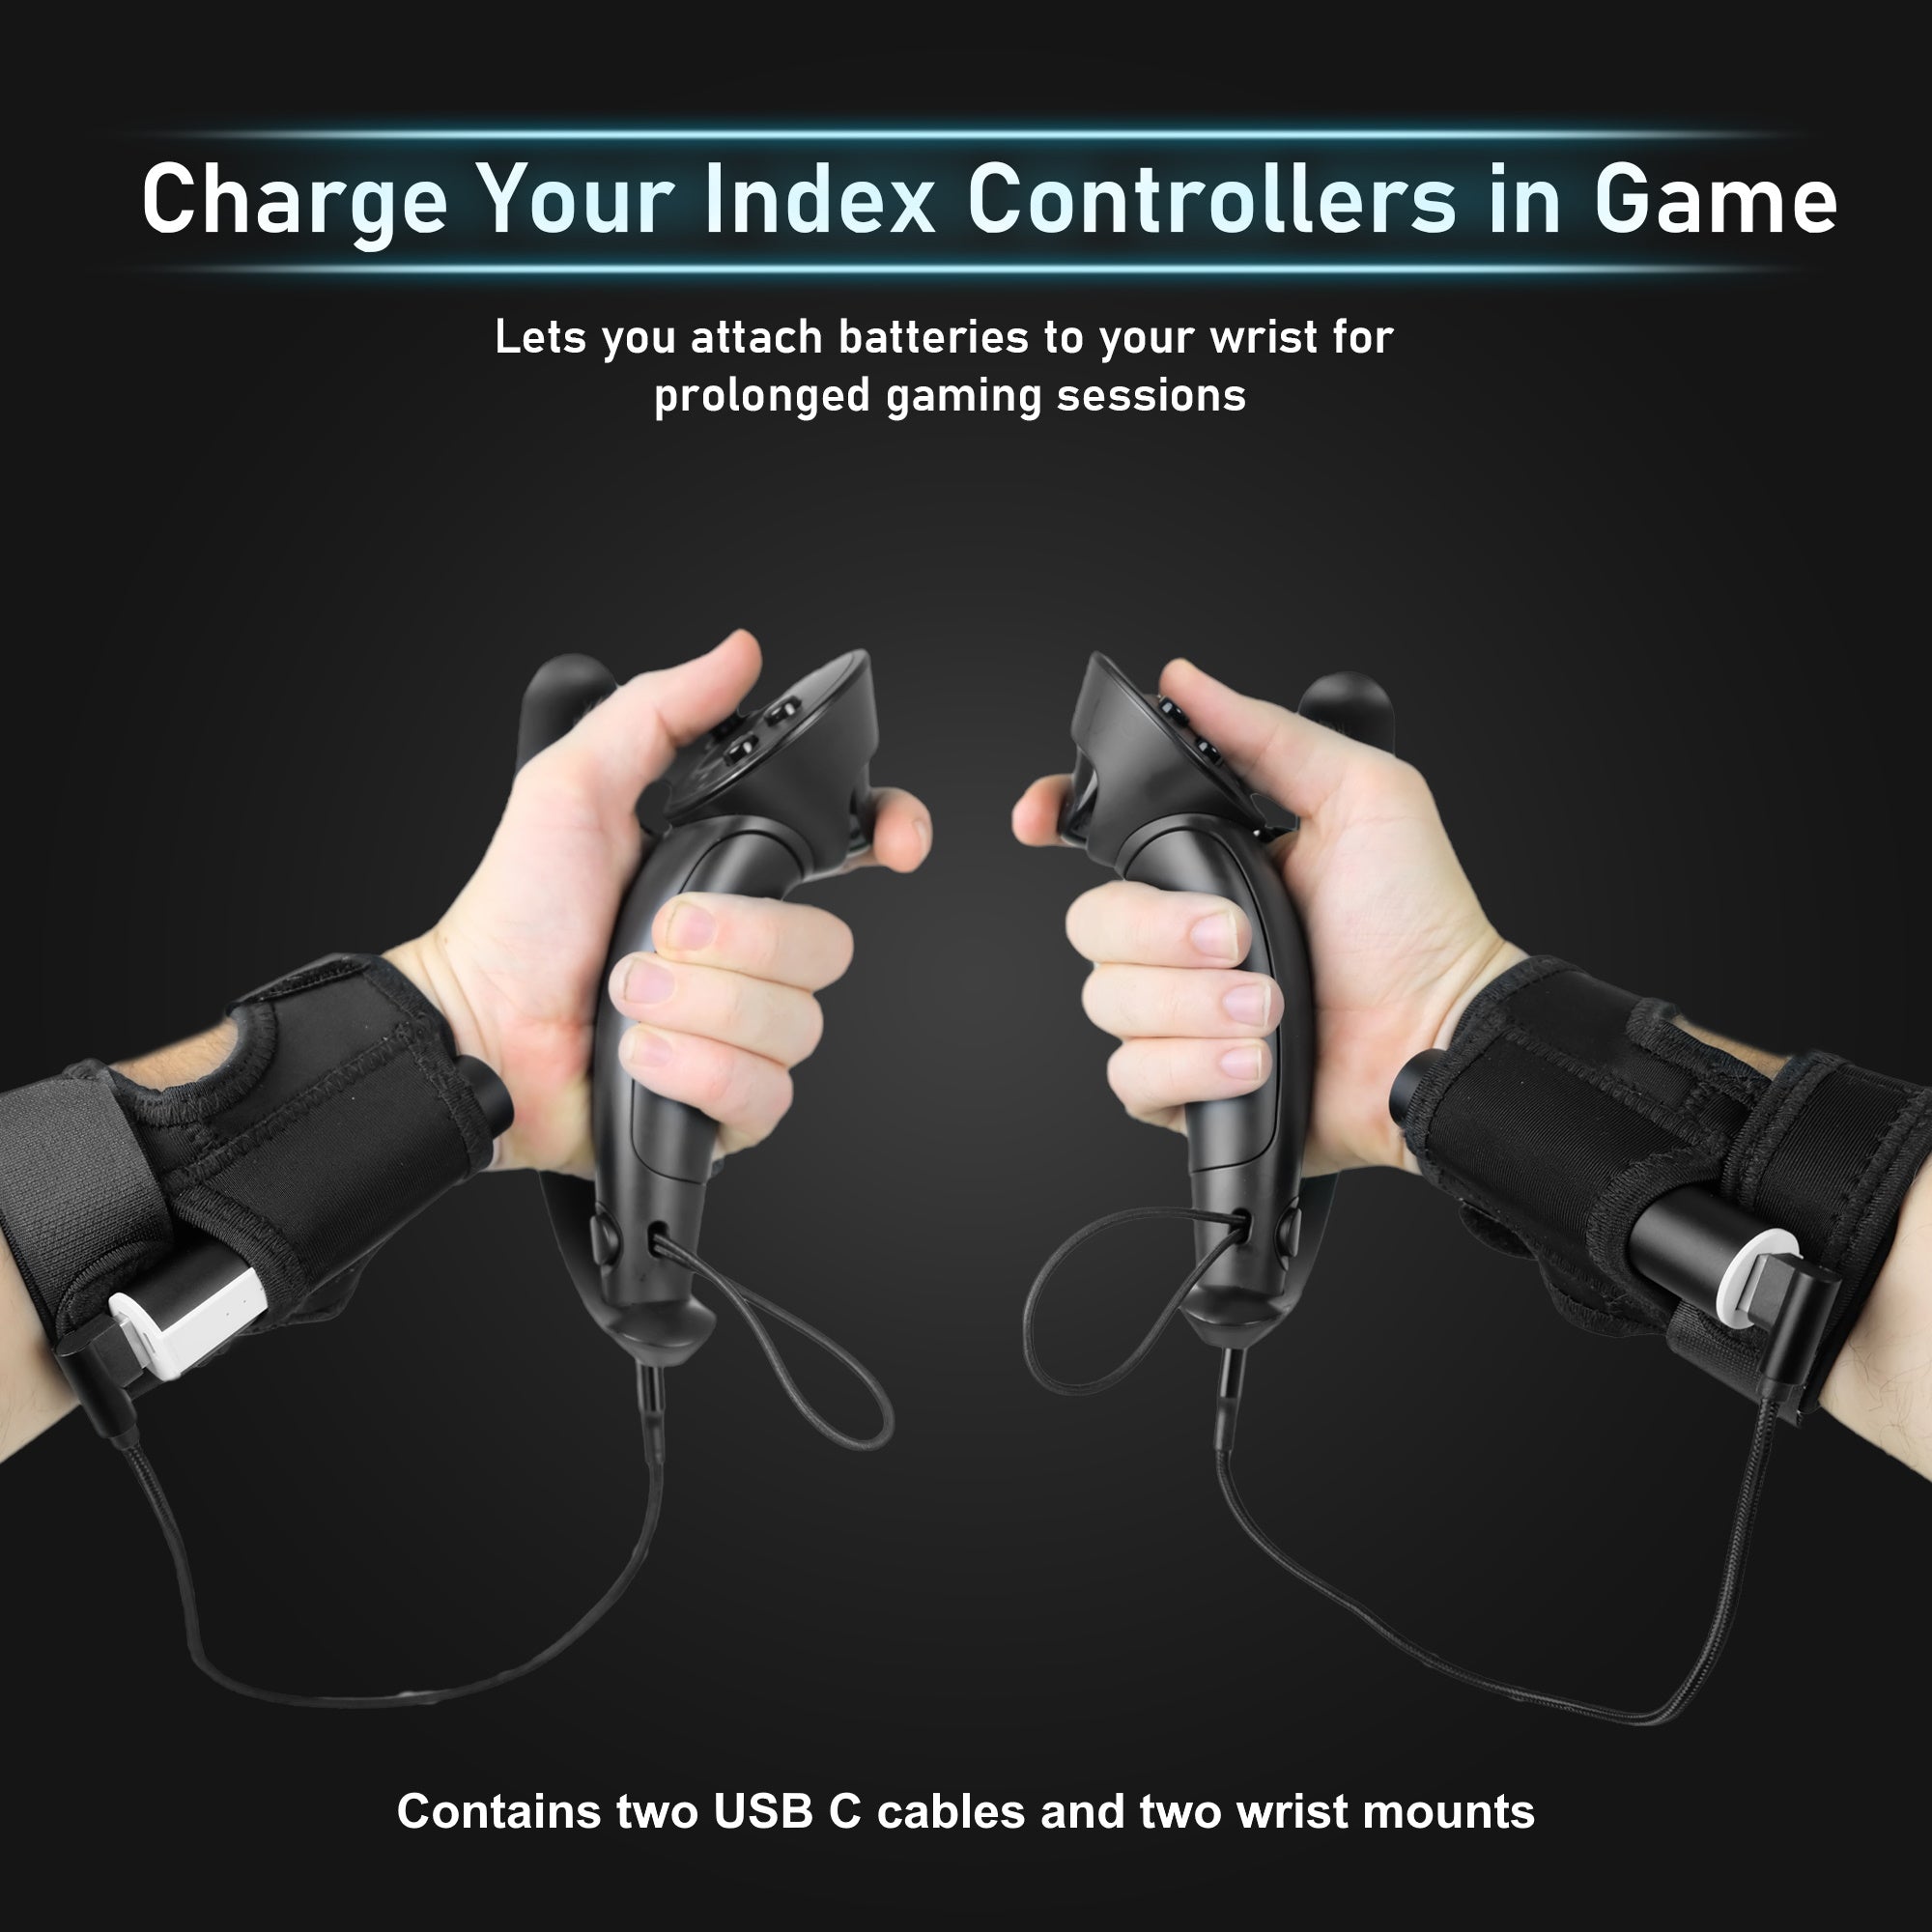 Charge your index controllers in game. Lets you attach batteries to your wrist for prolonged gaming sessions. Contains two usb c cables and two wrist mounts